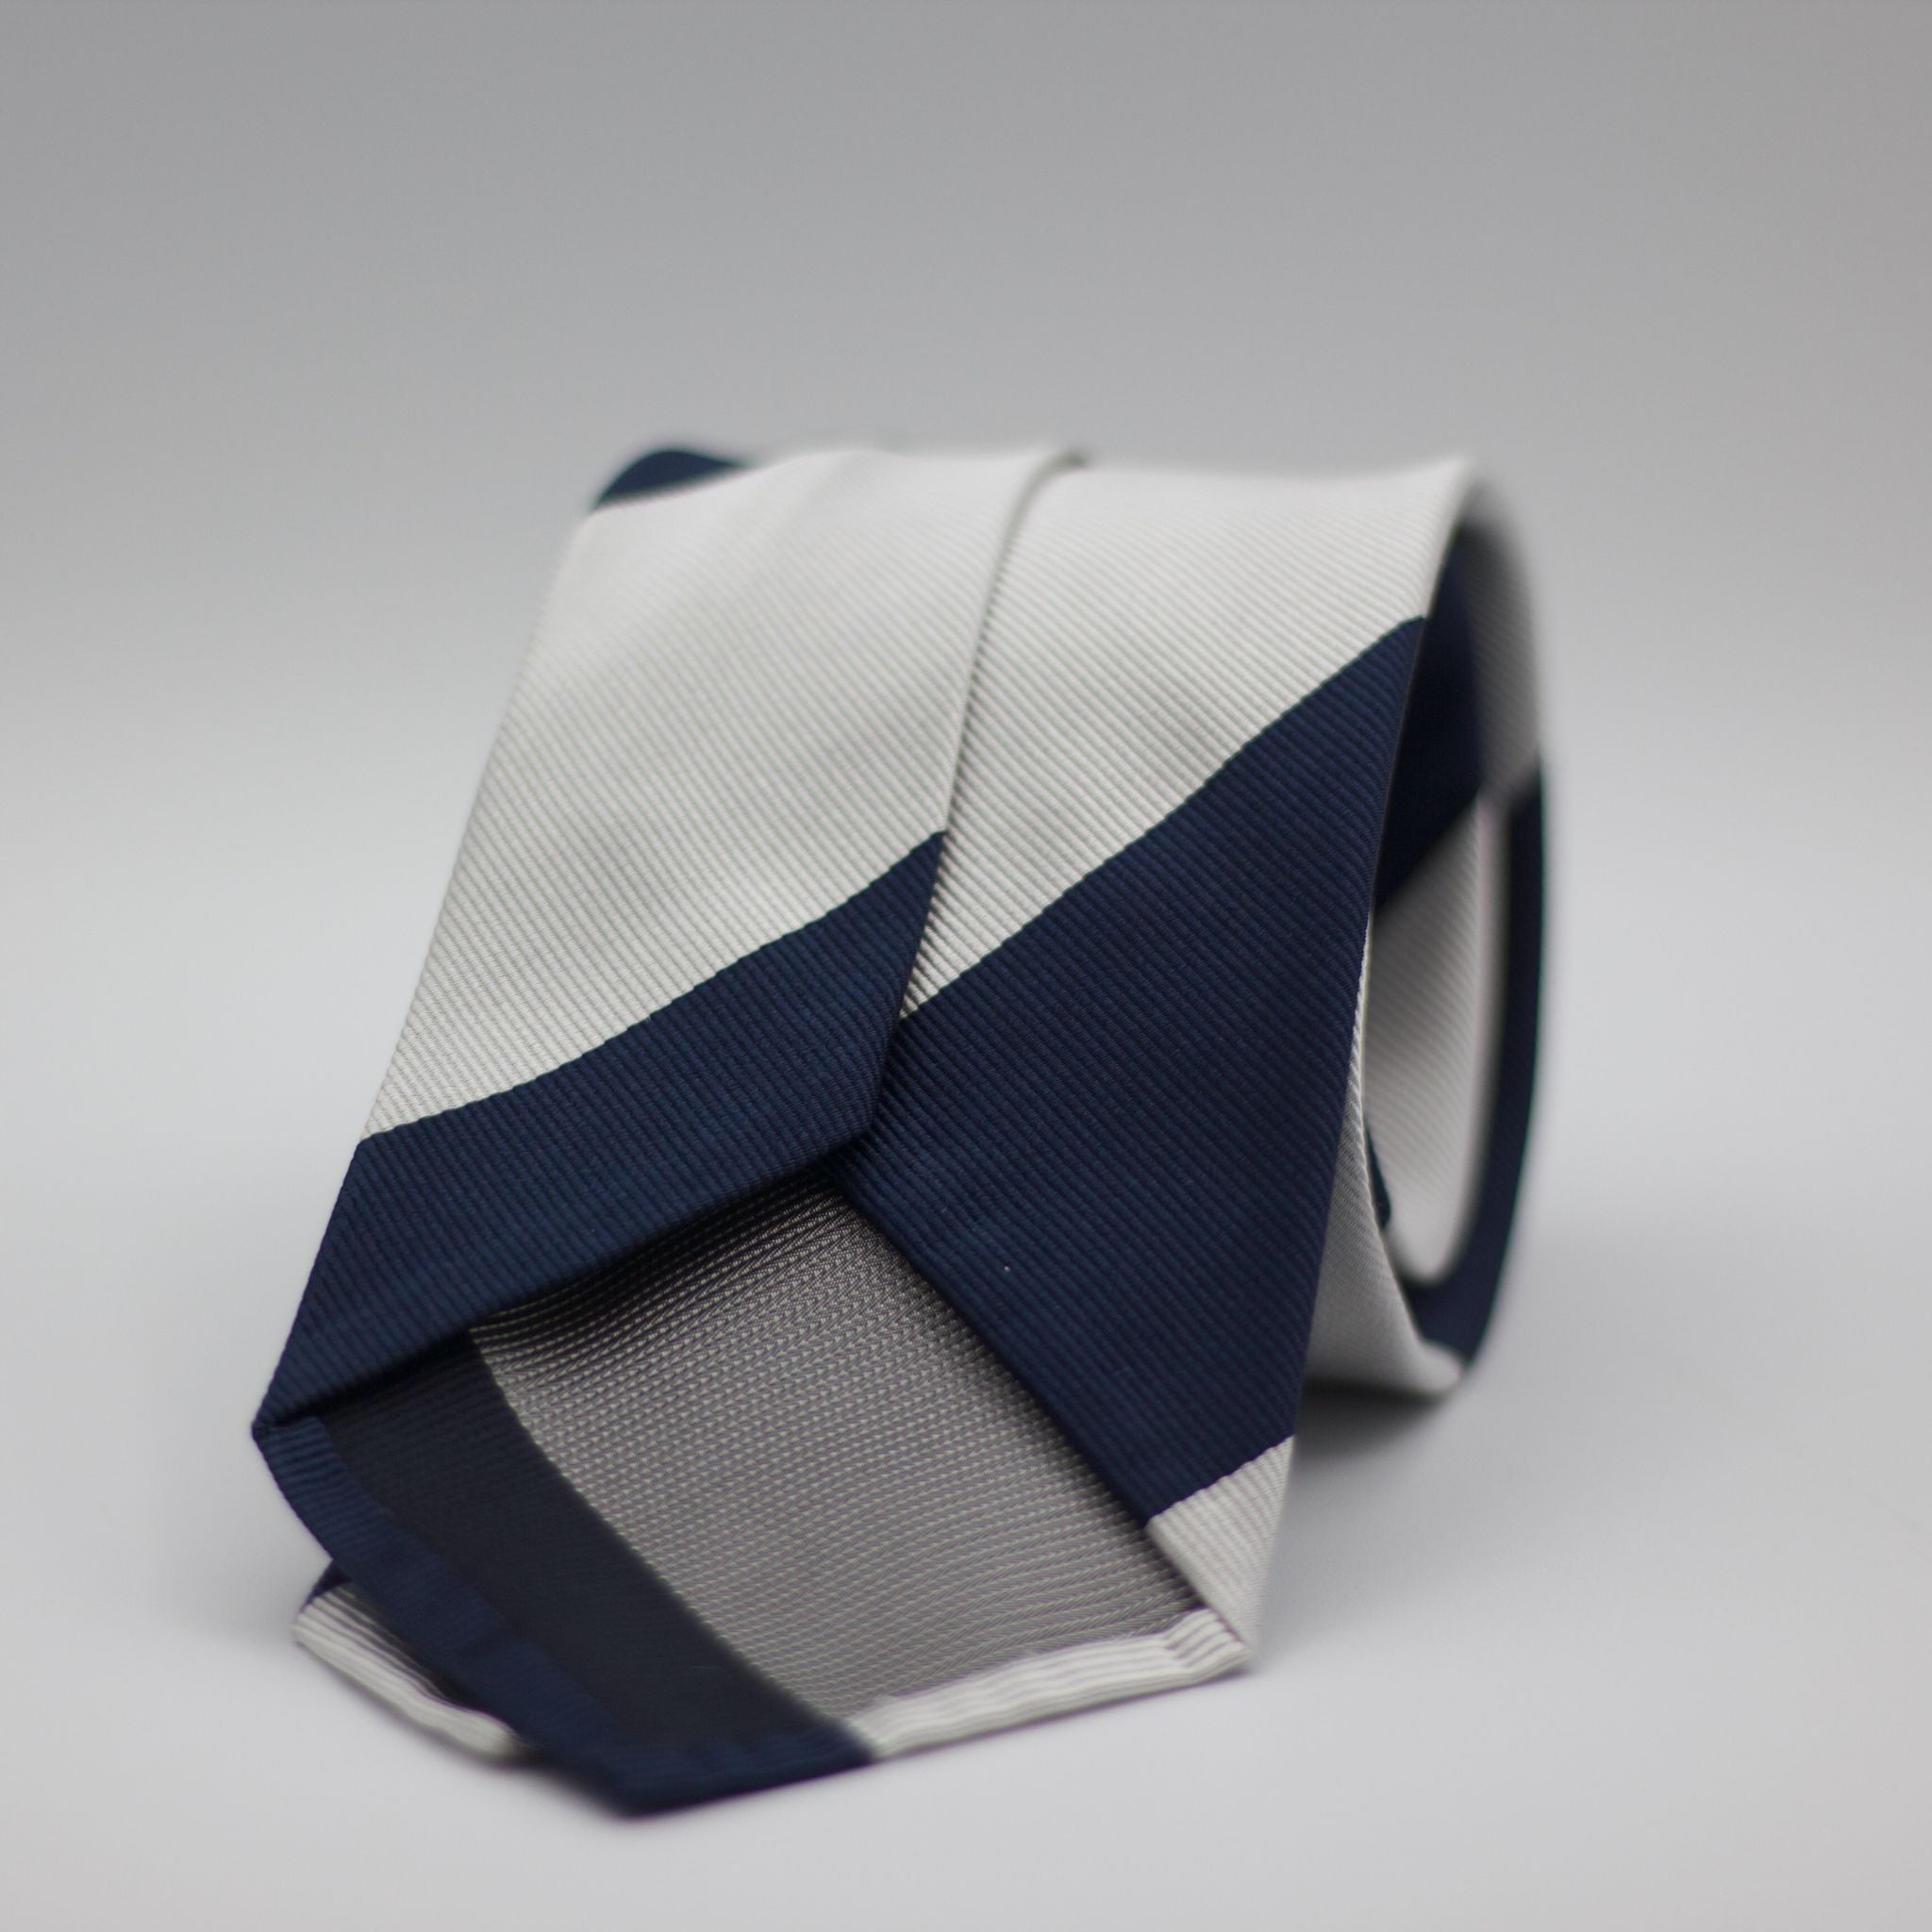 Cruciani & Bella 100% Woven Jacquard Silk Unlined Blue and White stripes Unlined Tie Handmade in Italy 8 x 150 cm